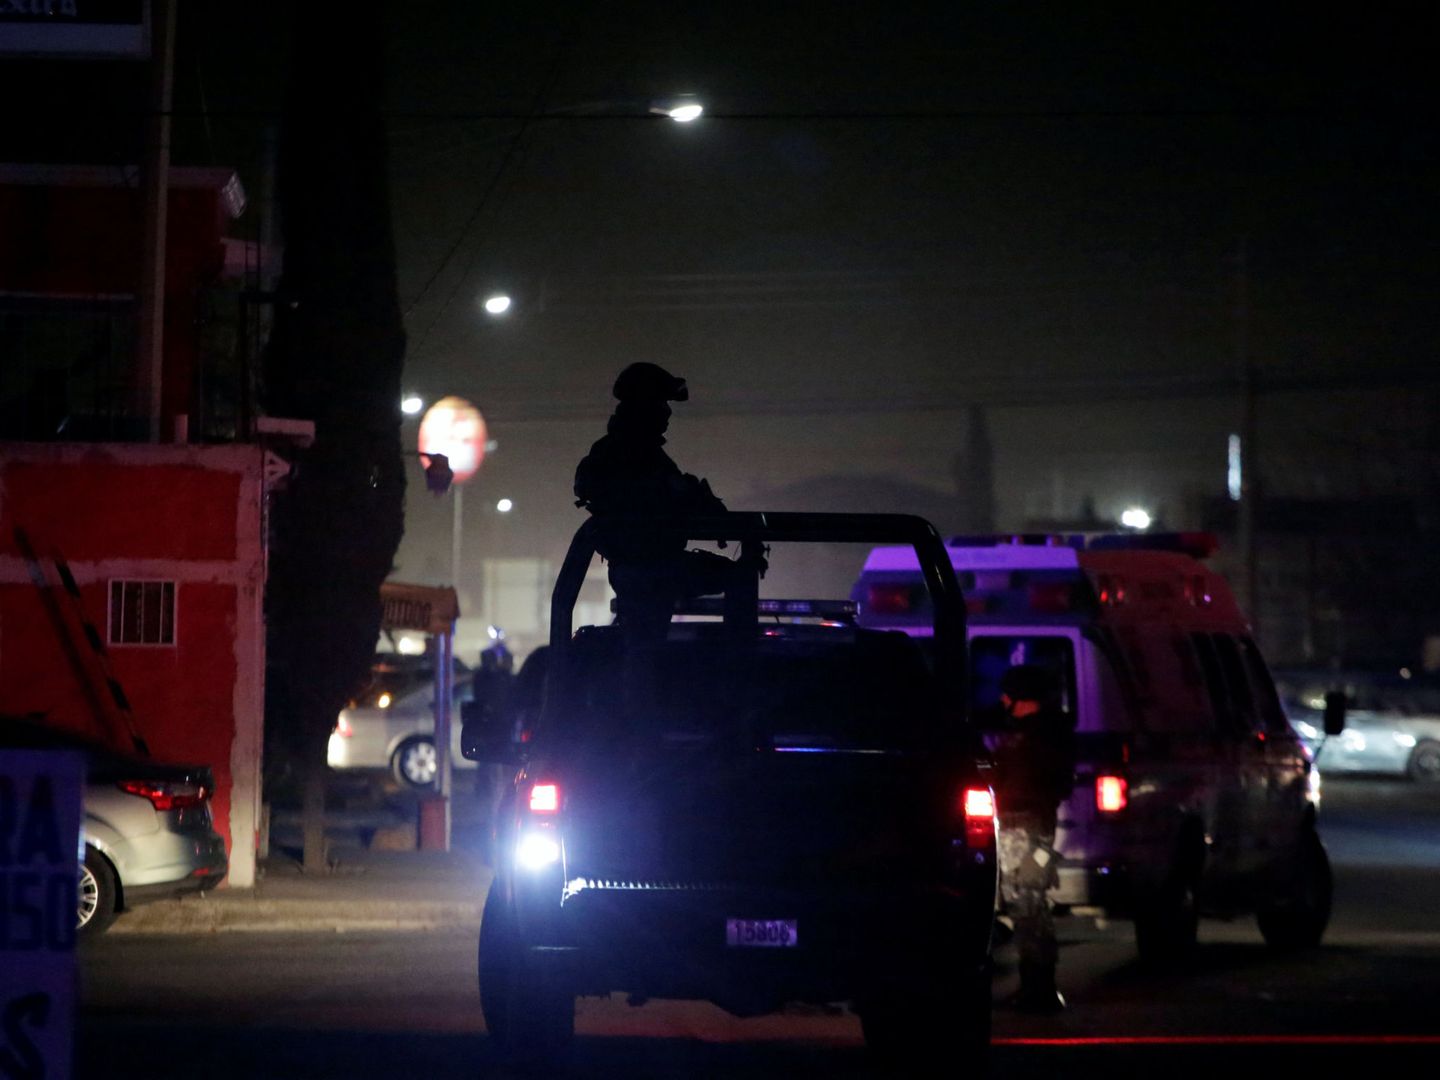 Police officers guard the area after a shoot out between the police and hitmen, where three men were wounded and one dead according to the local police, in Ciudad Juarez, Mexico February 9, 2018. Picture taken February 9, 2018. REUTERS Jose Luis Gonzalez